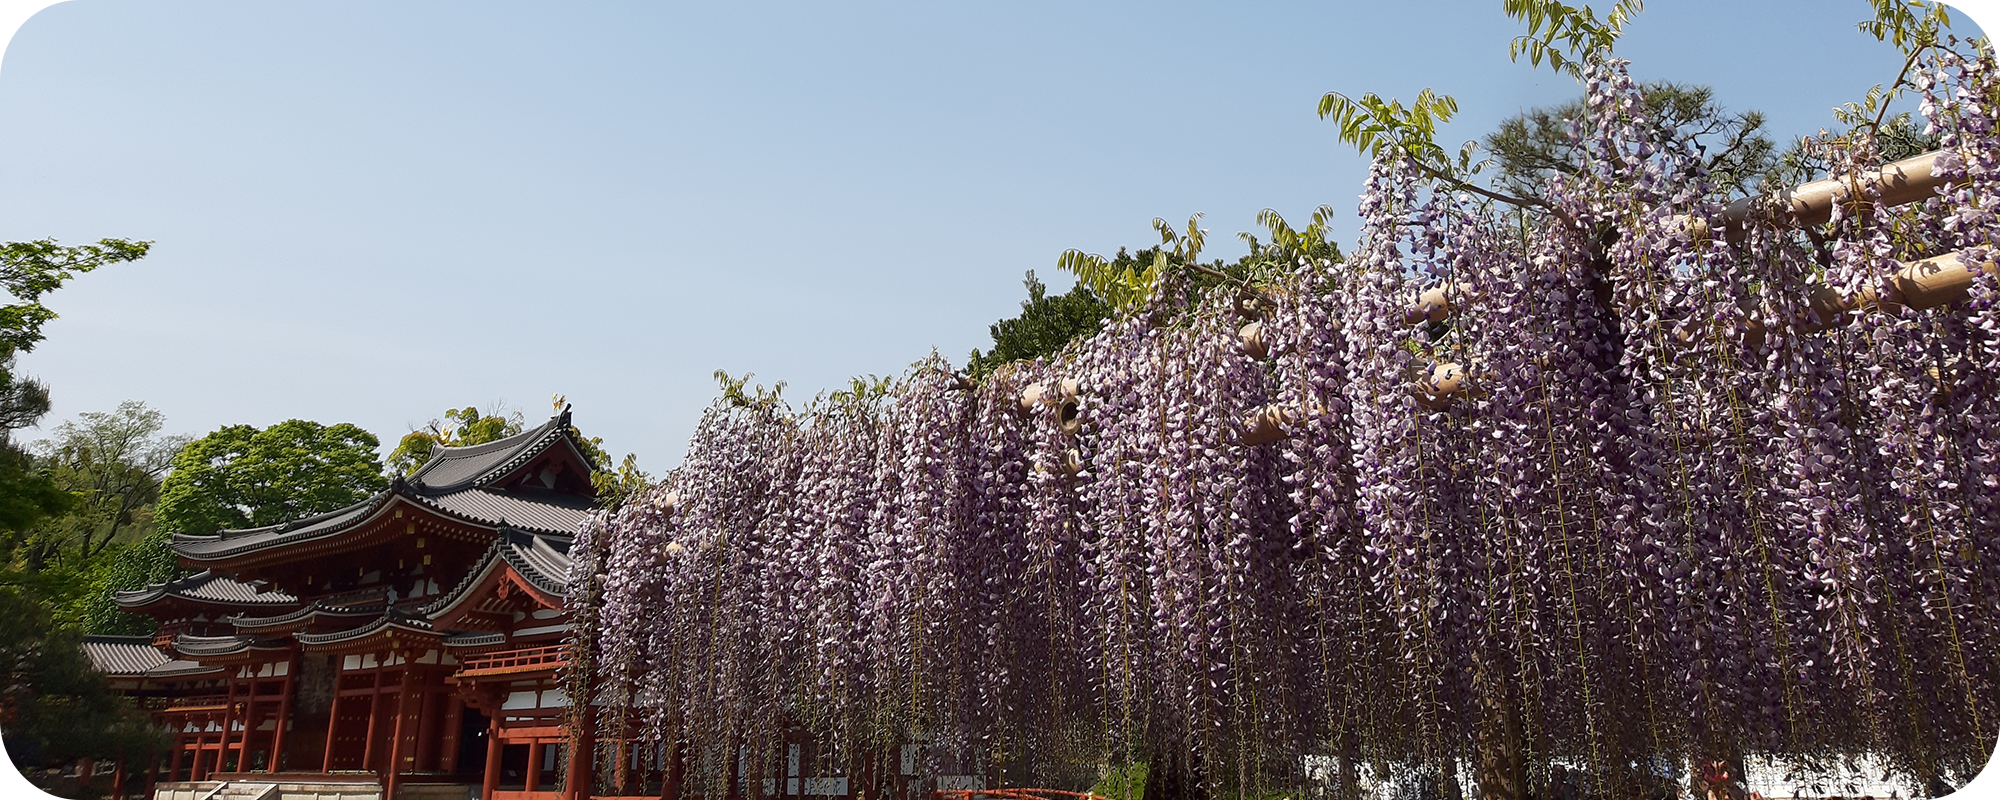 Read more about the article Wisteria in Uji 平等院鳳凰堂 藤の花